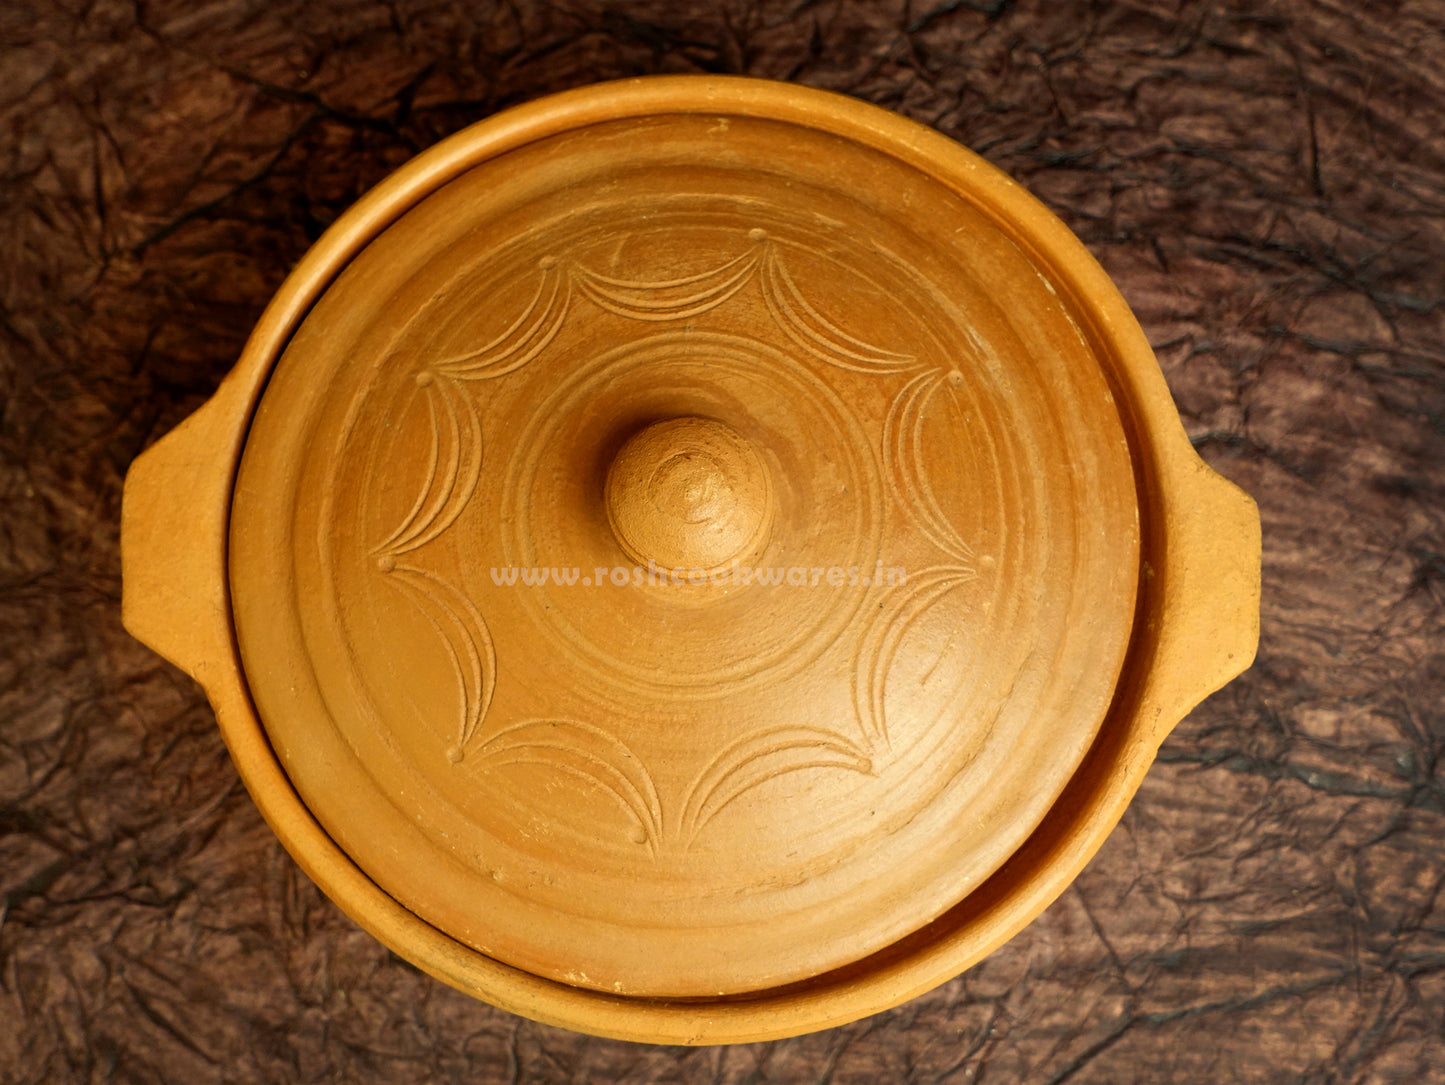 Clay - Handi/Pot - Cooking and Serving - With Lid.